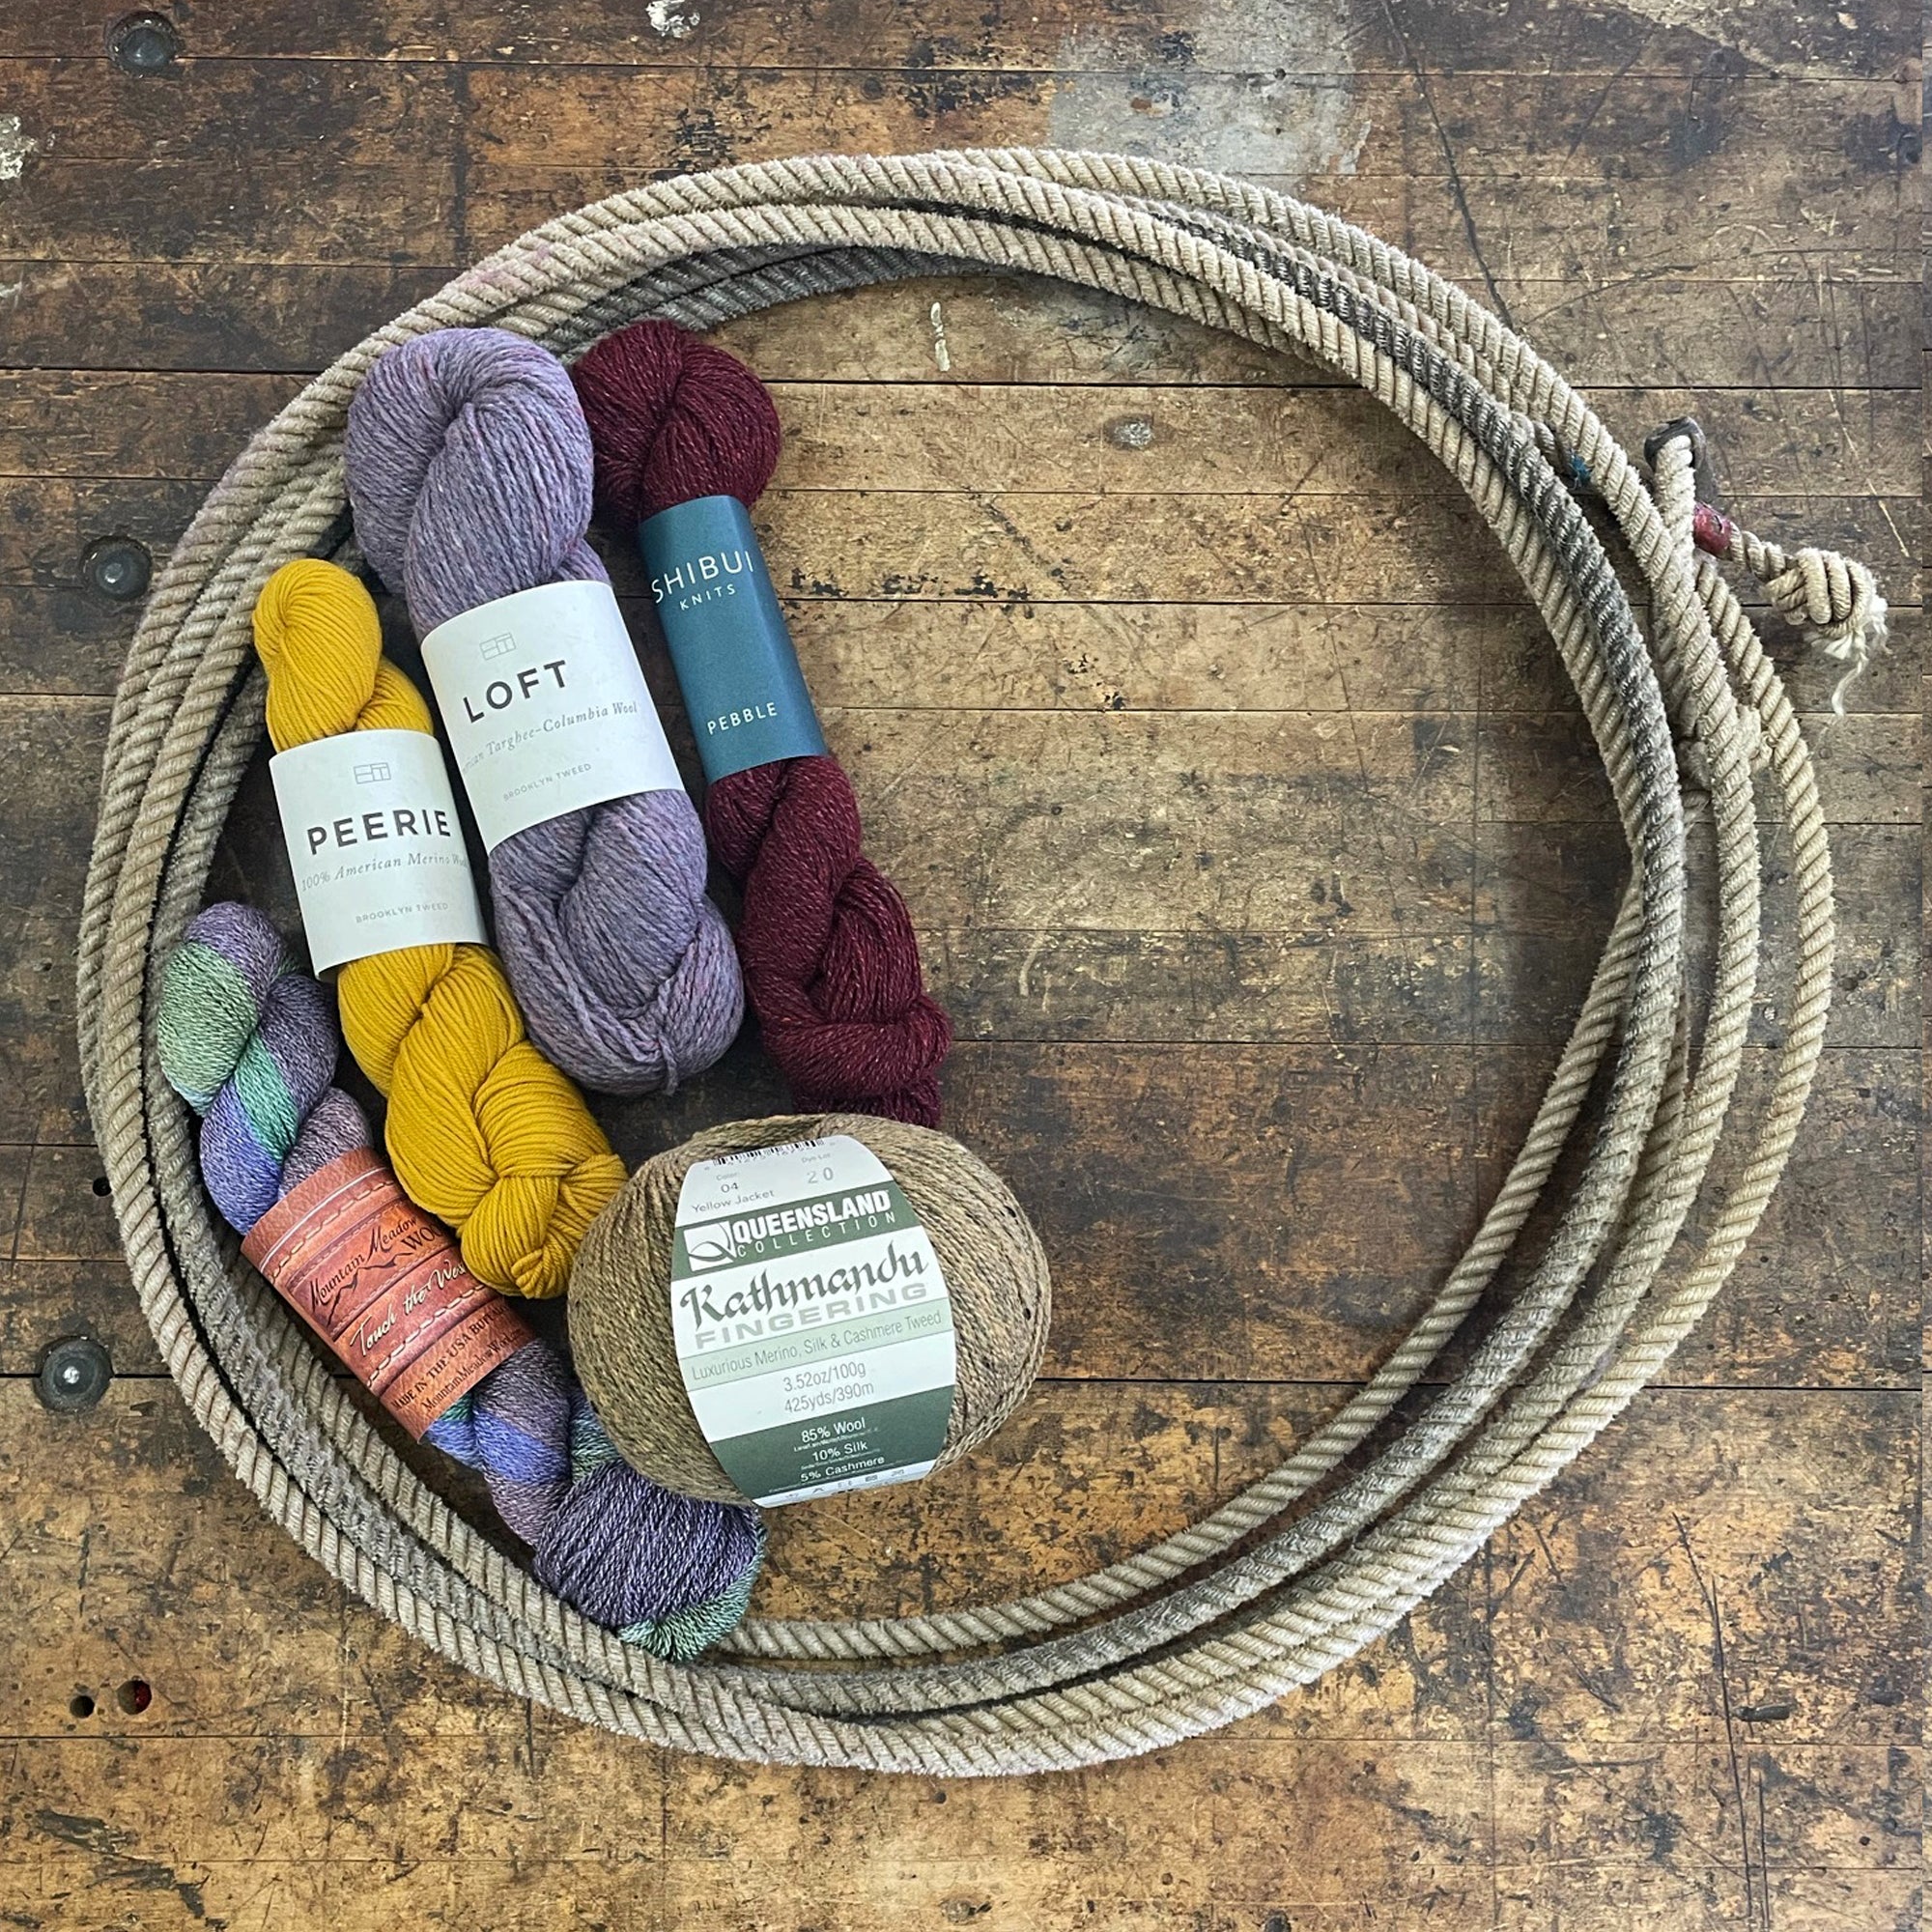 A lariat filled with fingering weight yarn